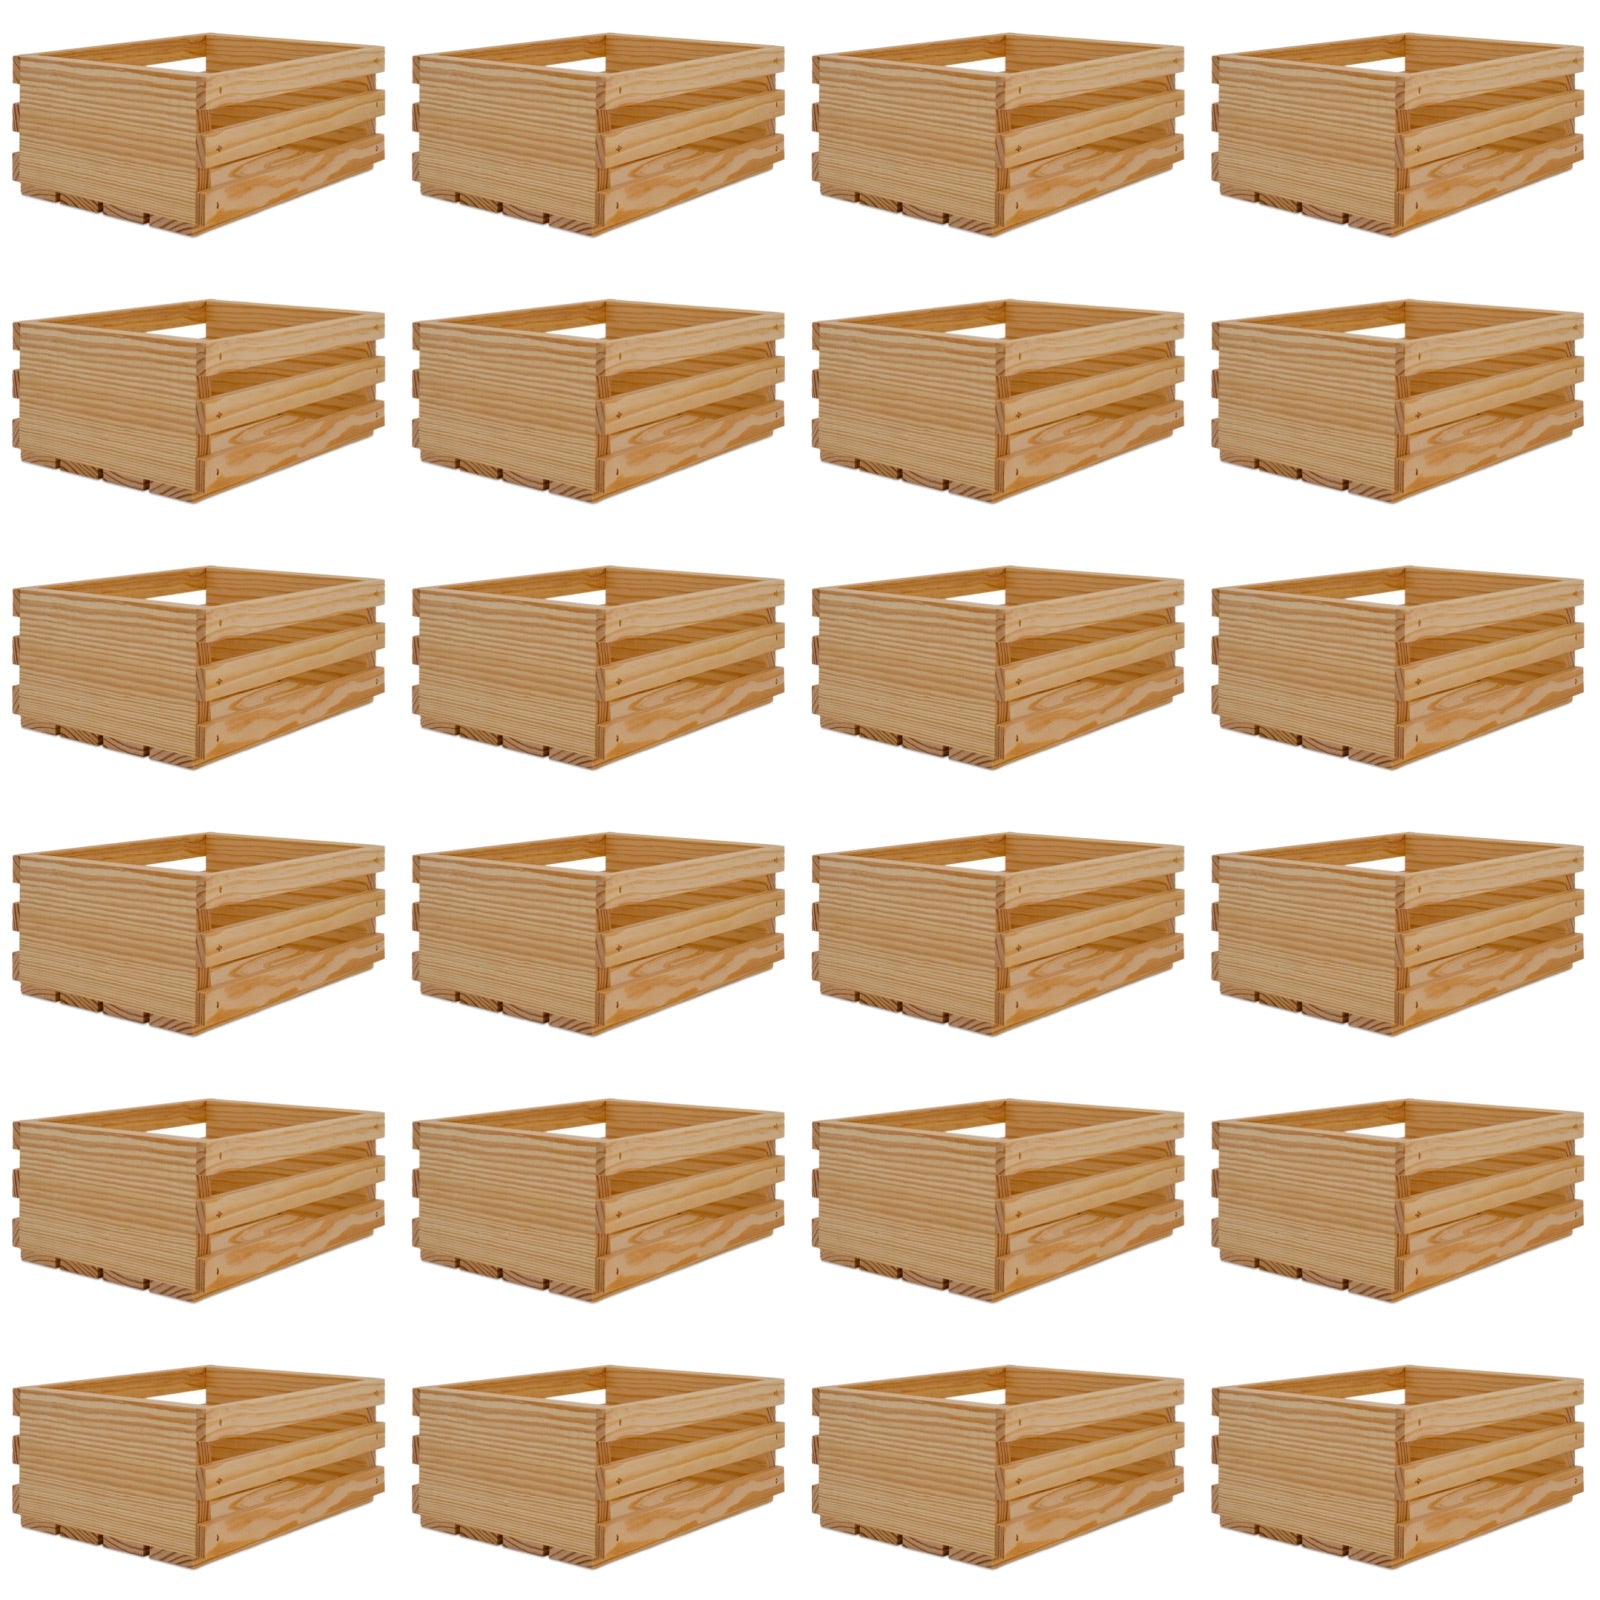 24 Small wooden crates 10x8x4.5, 6-SS-10-8-4.5-NX-NW-NL, 12-SS-10-8-4.5-NX-NW-NL, 24-SS-10-8-4.5-NX-NW-NL, 48-SS-10-8-4.5-NX-NW-NL, 96-SS-10-8-4.5-NX-NW-NL